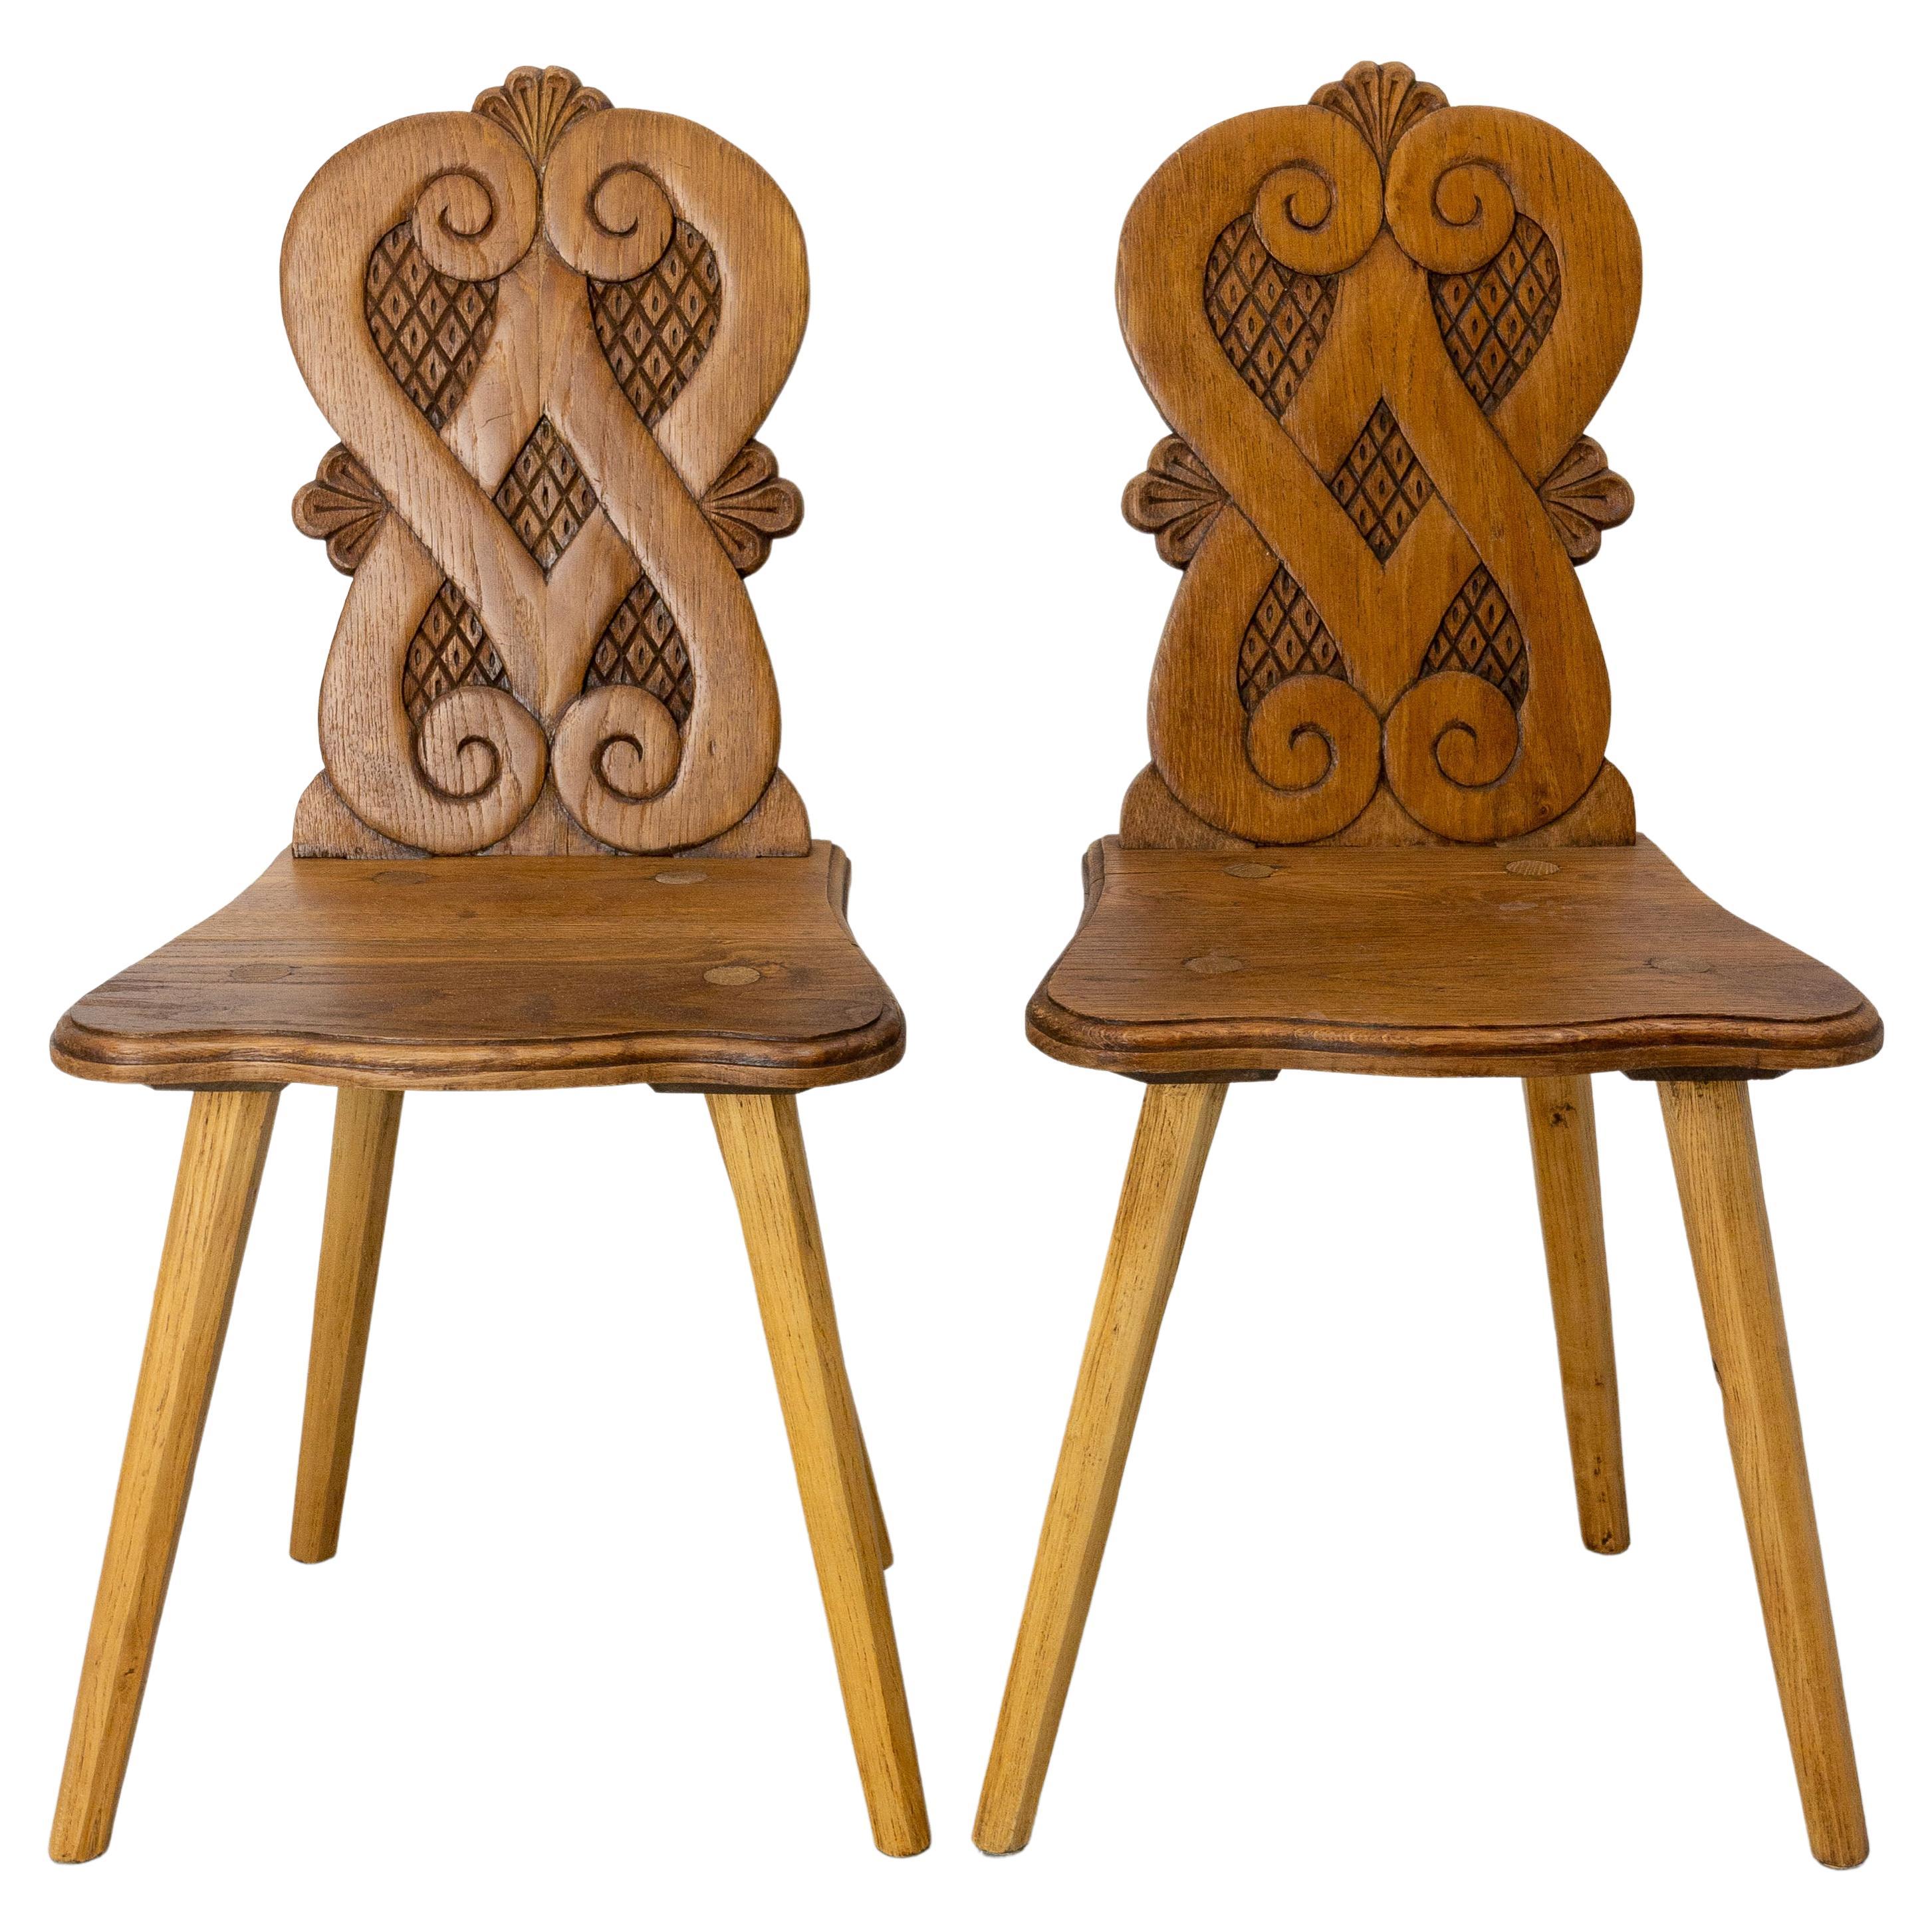 Pair Dining Chairs Swiss Alp Escabelles Oak Brutalist Style, French, Late 19th C For Sale